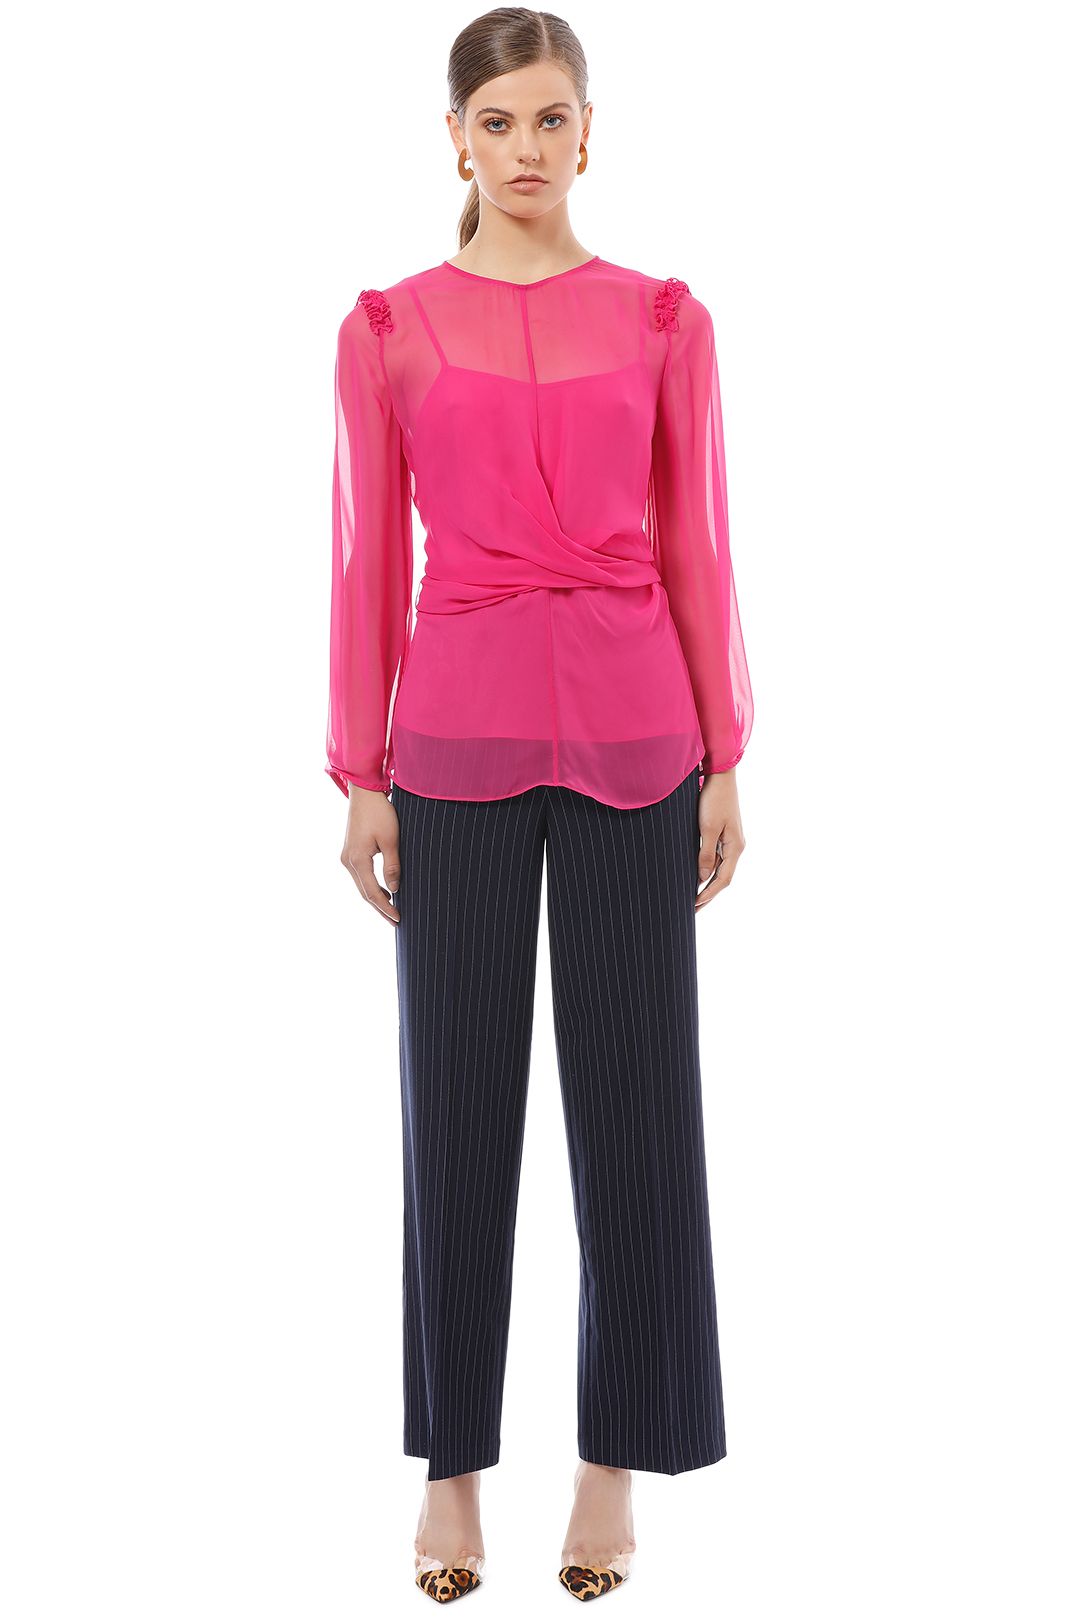 Camilla and Marc - Dylan Twist Top - Pink - Front